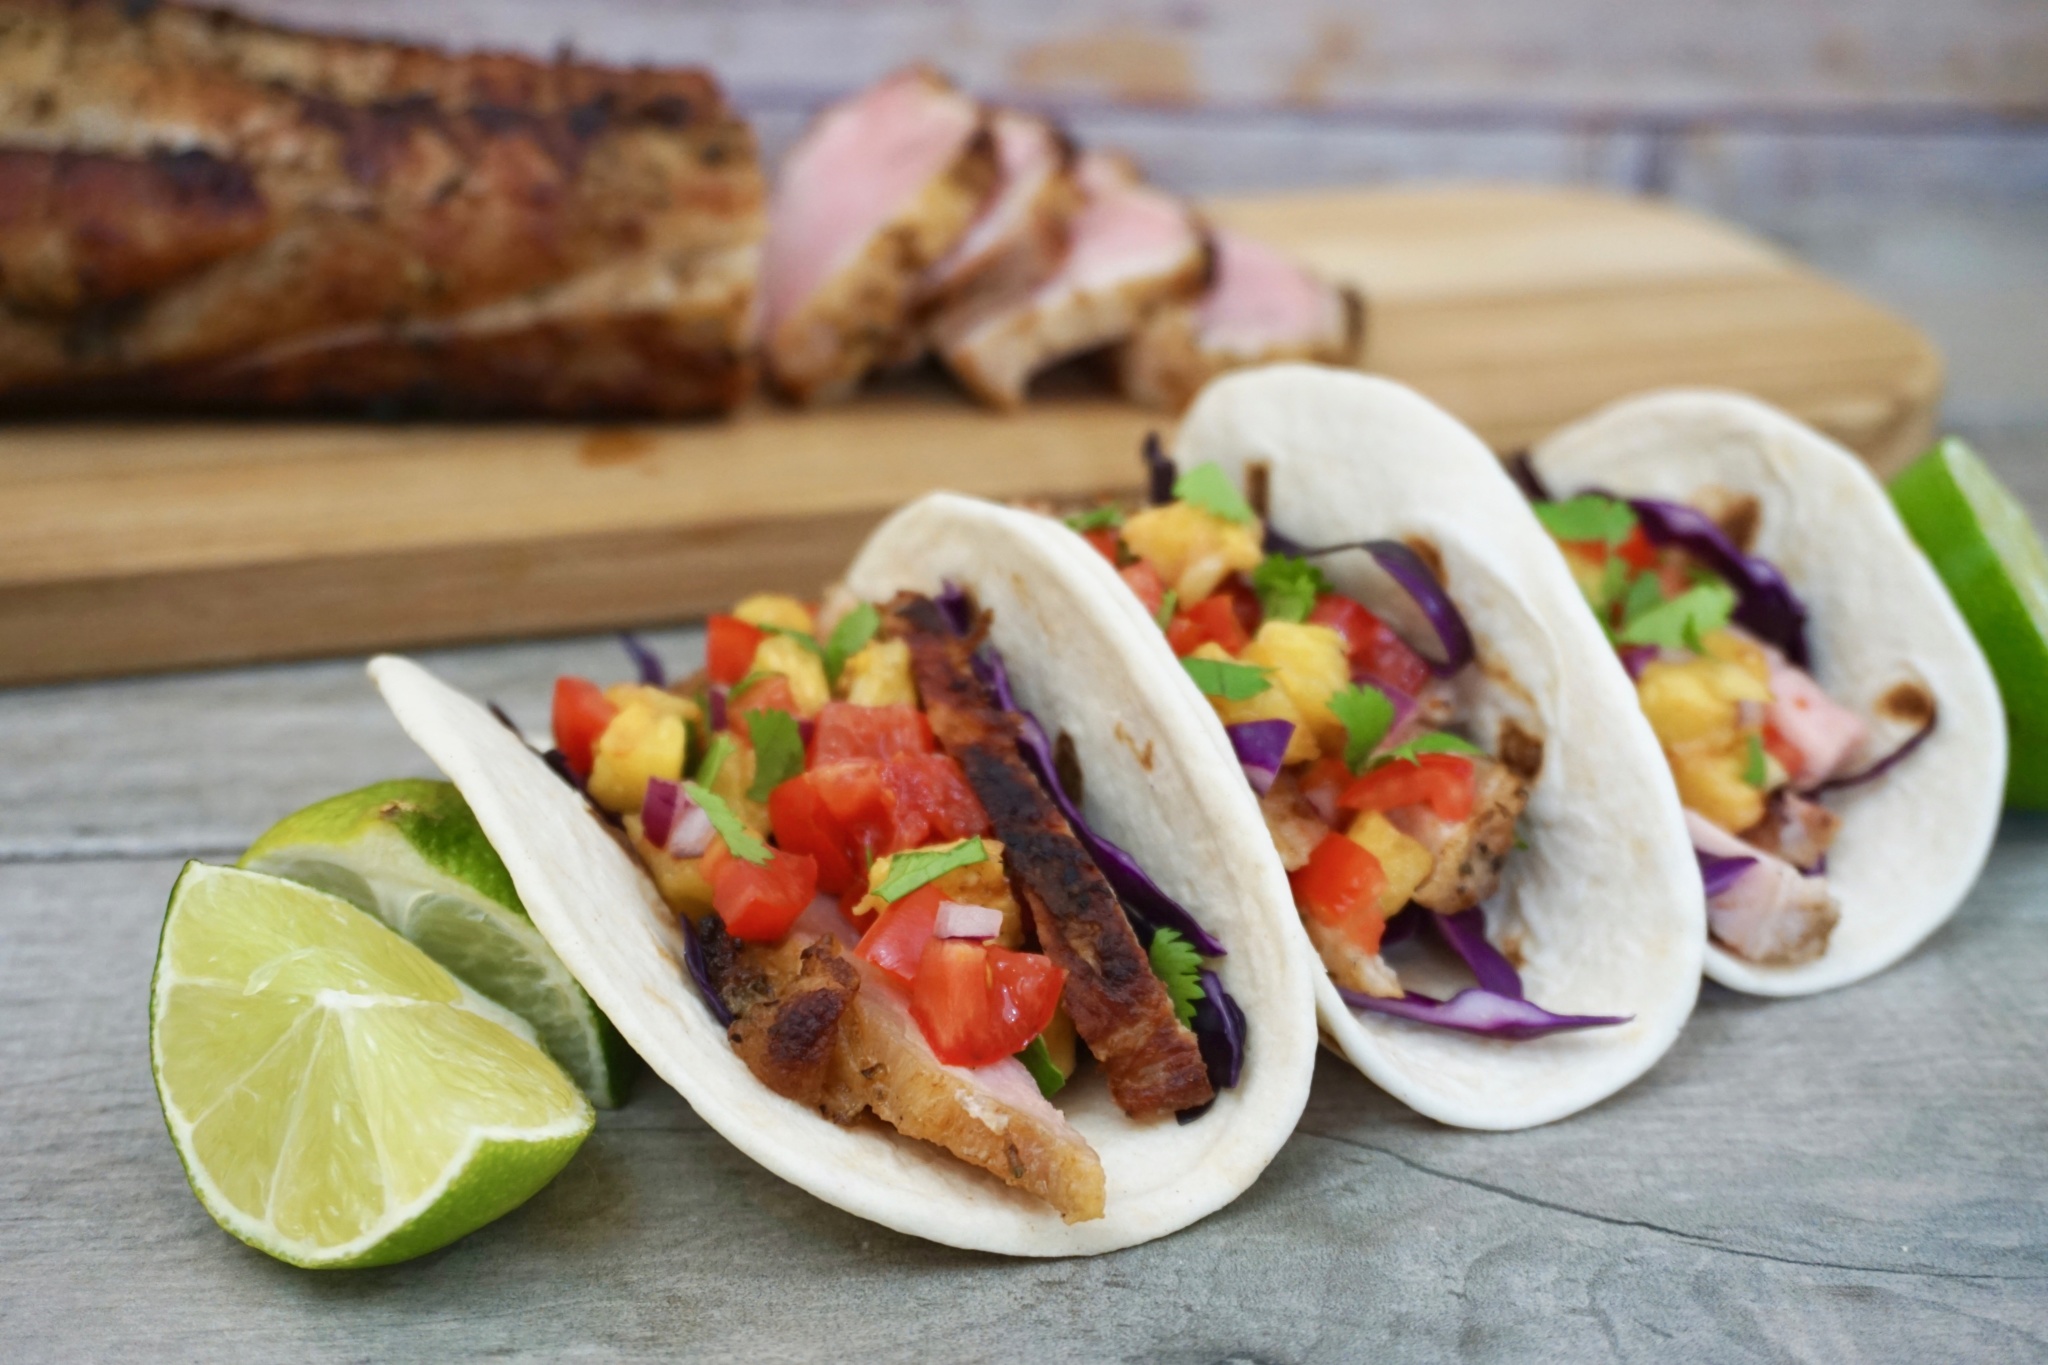 Easy Grilled Pork Loin Tacos With Grilled Pineapple Salsa